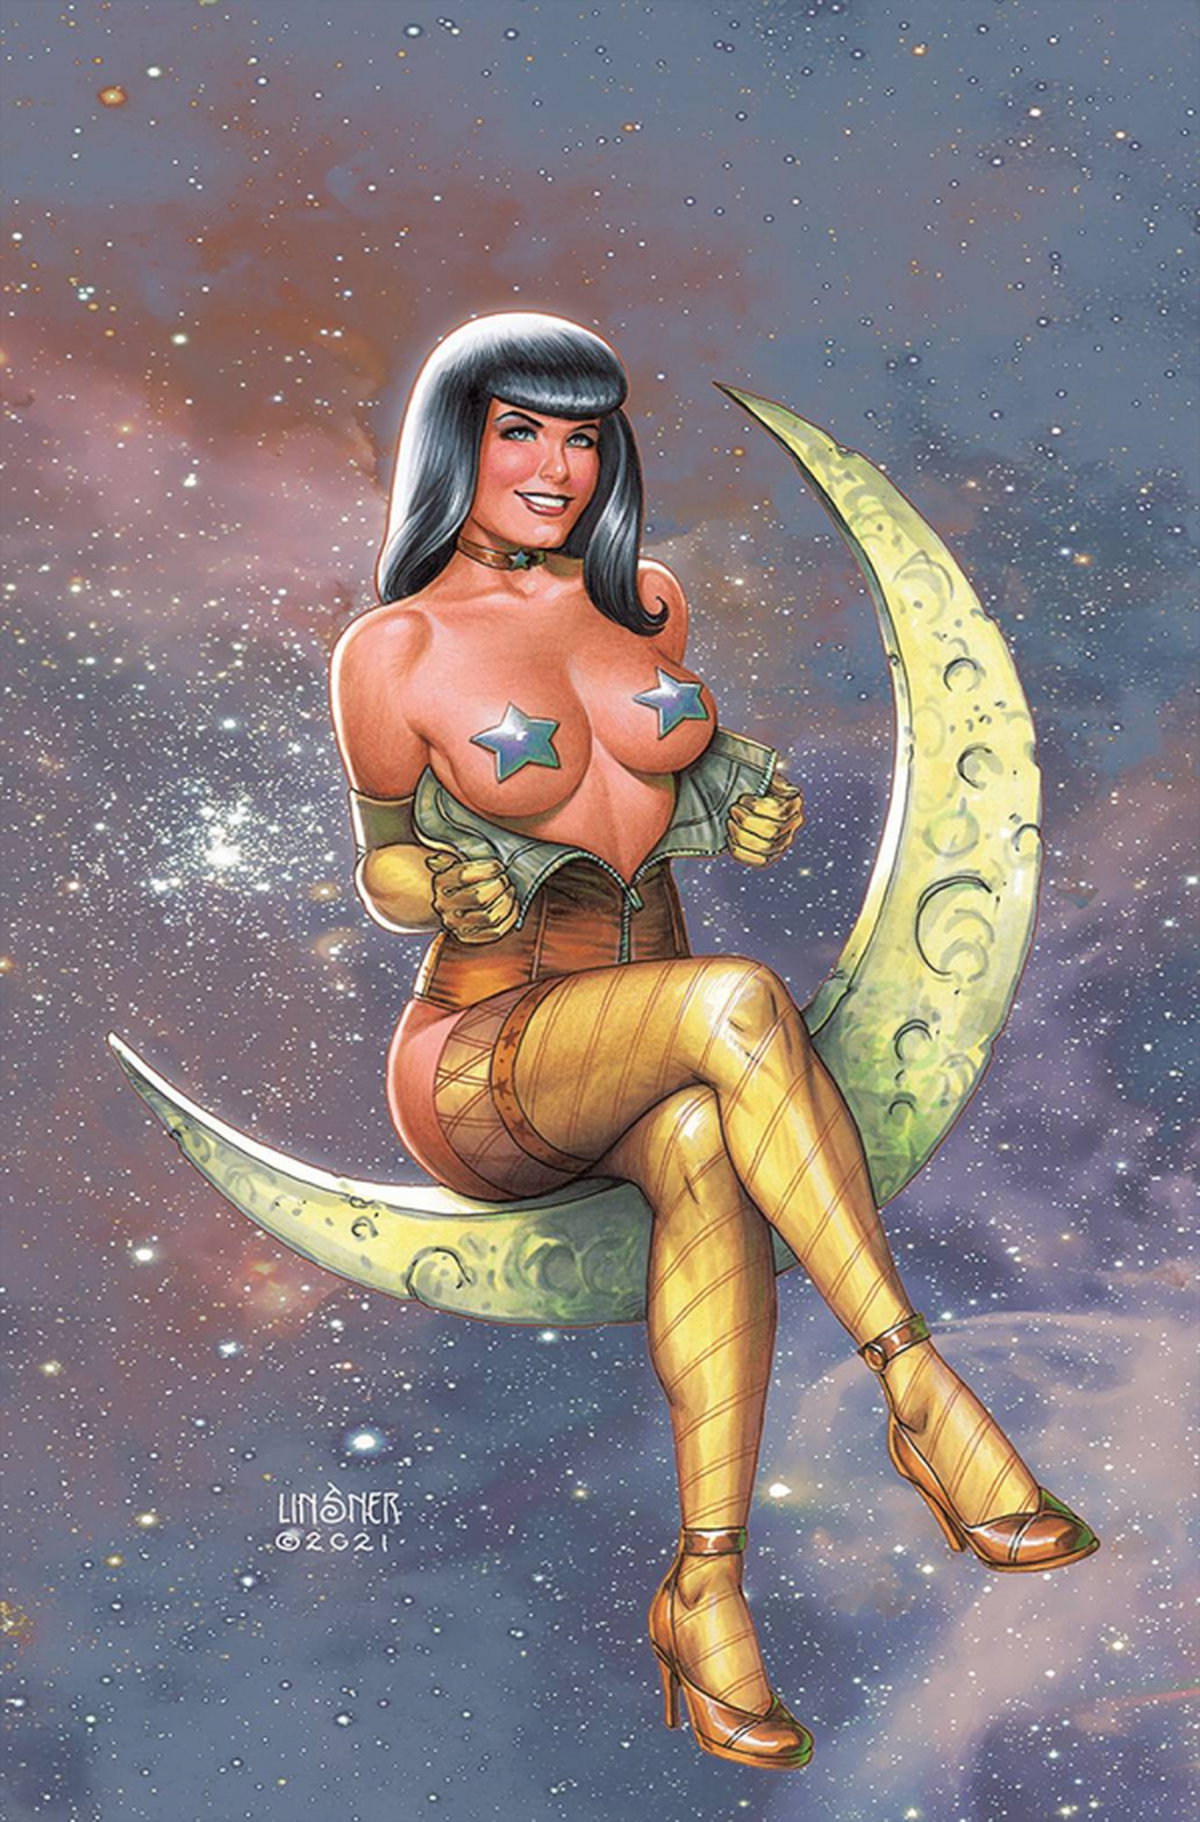 Bettie Page: The Curse of the Banshee #4